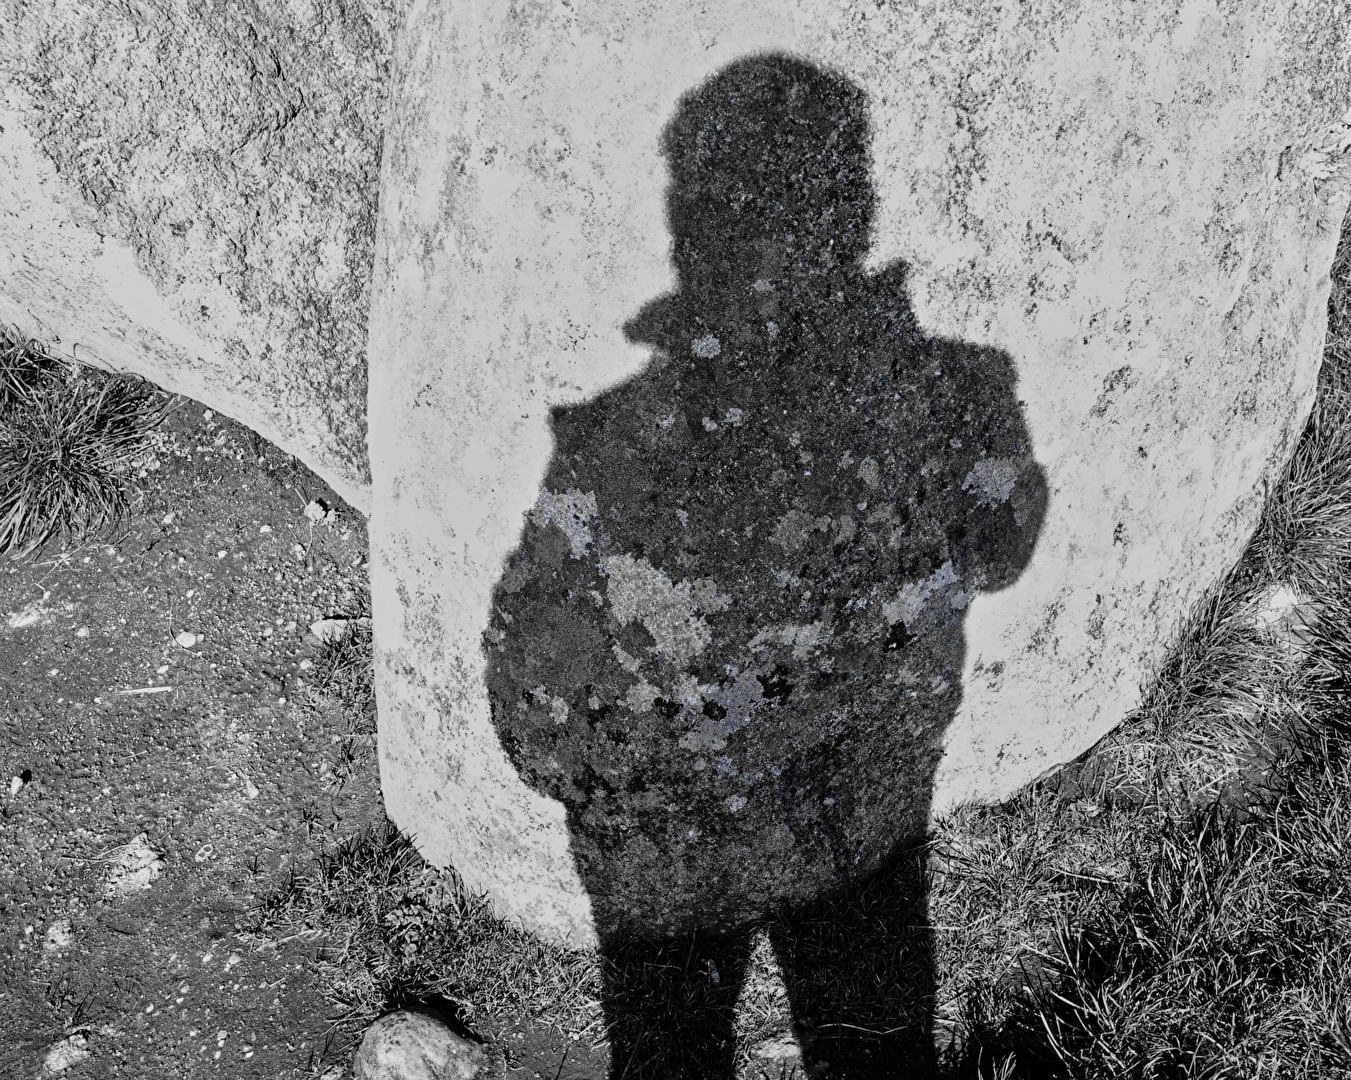 Shadow on the stone